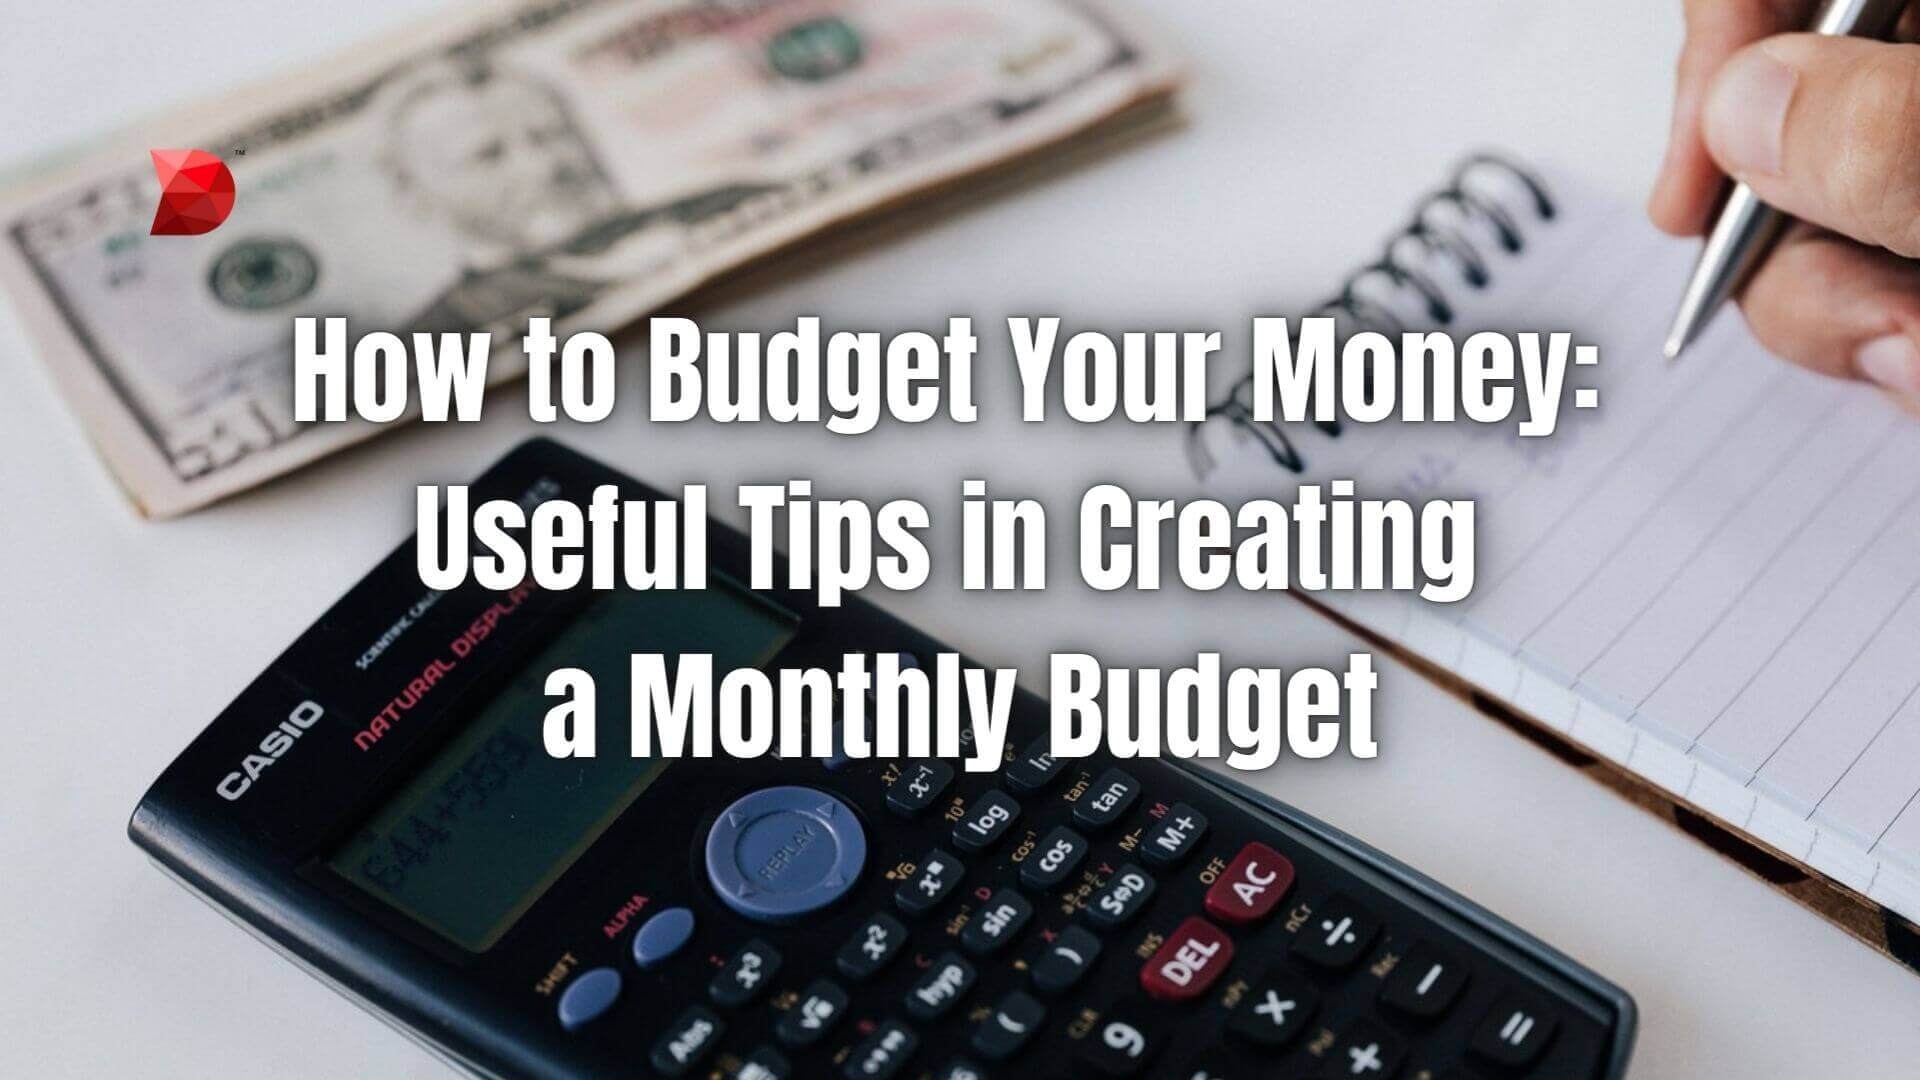 How to Budget Your Money Useful Tips in Creating a Monthly Budget